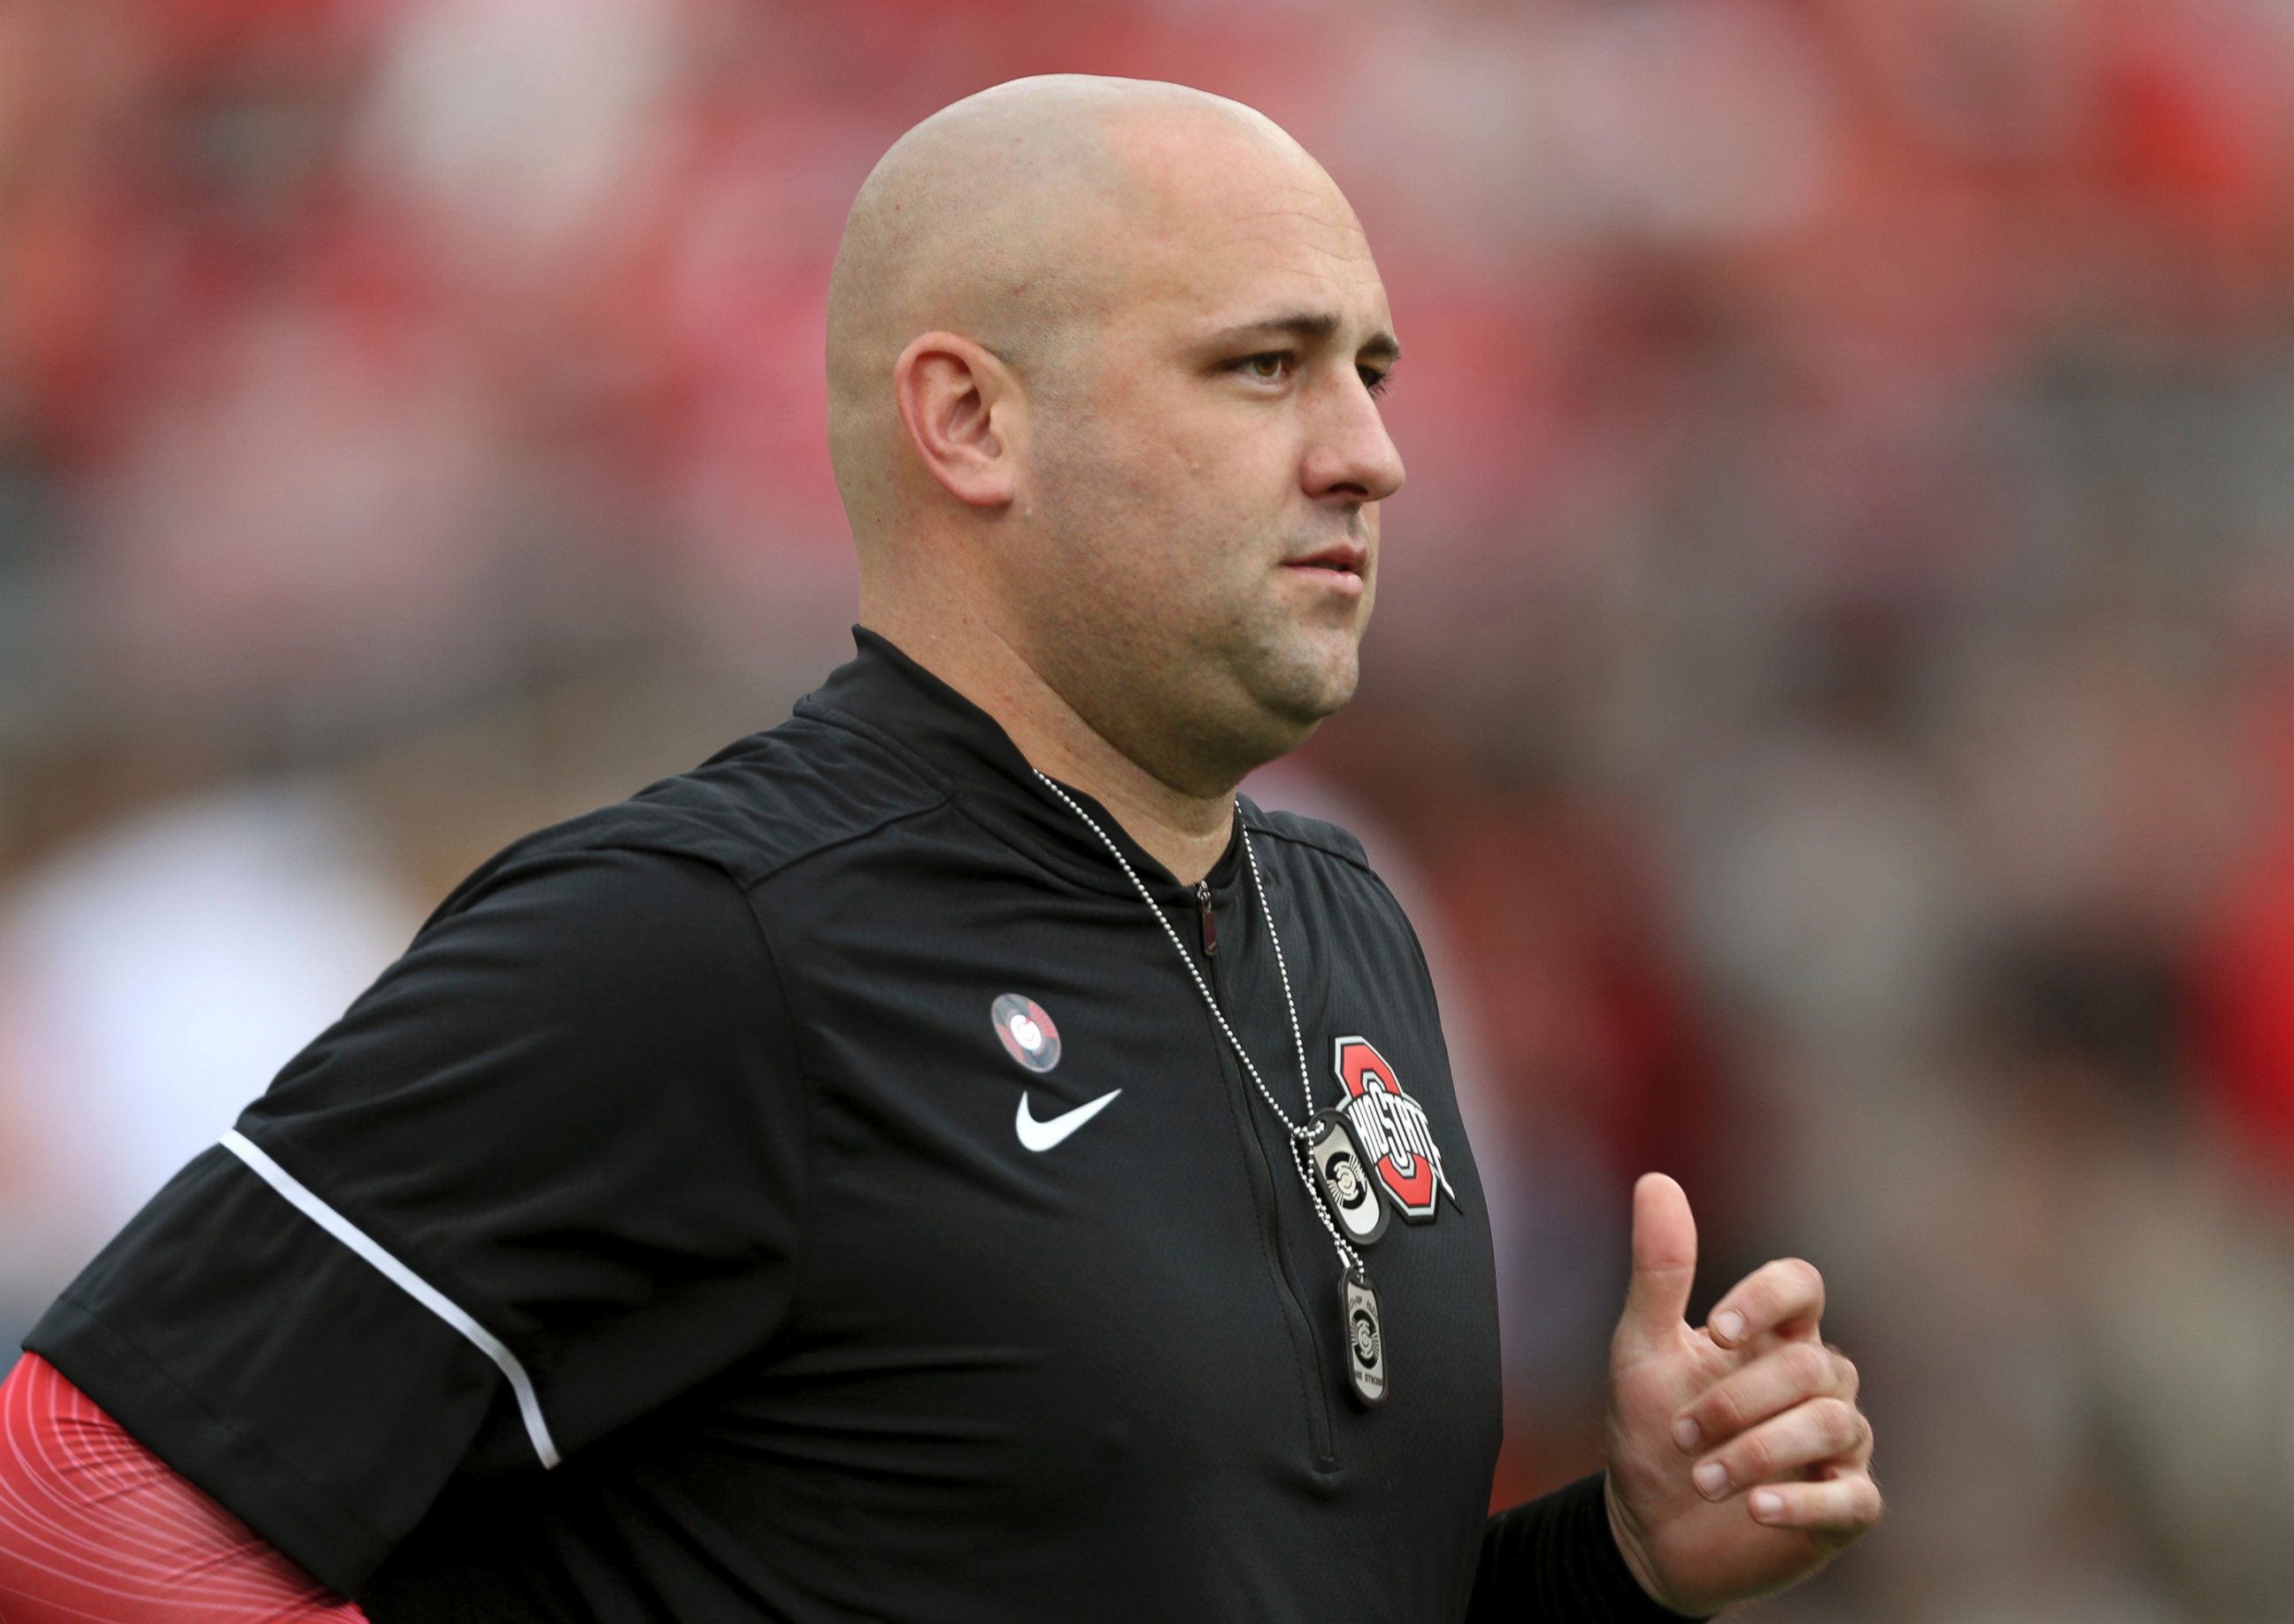 In this Sept. 16, 2017 photo, Ohio State assistant coach Zach Smith watches before the start of an NCAA college football game against Army in Columbus, Ohio.